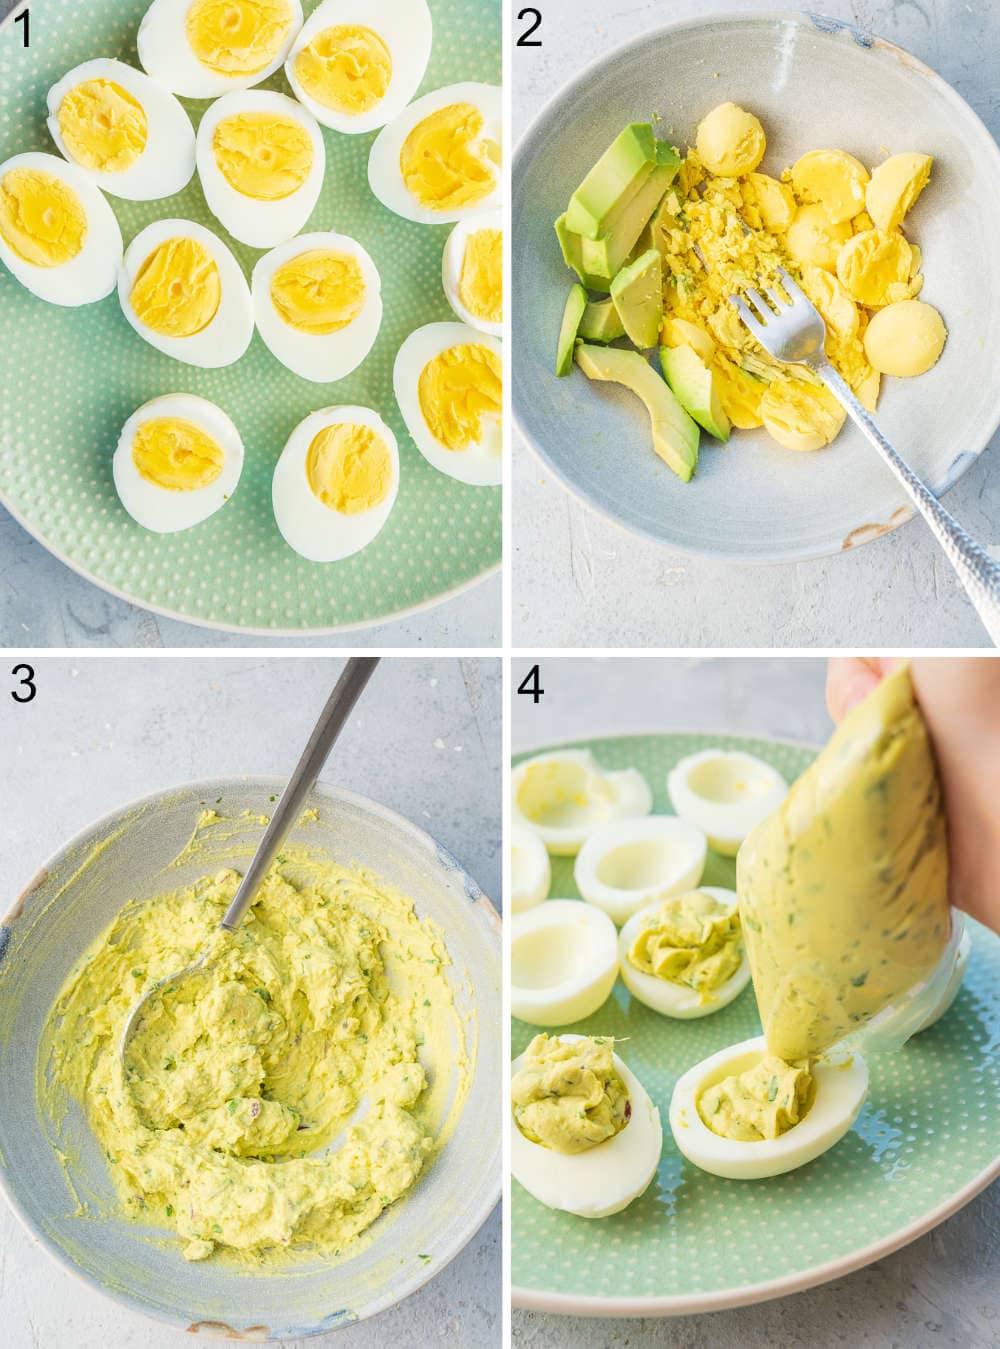 A collage of 4 photos showing how to prepare avocado deviled eggs.